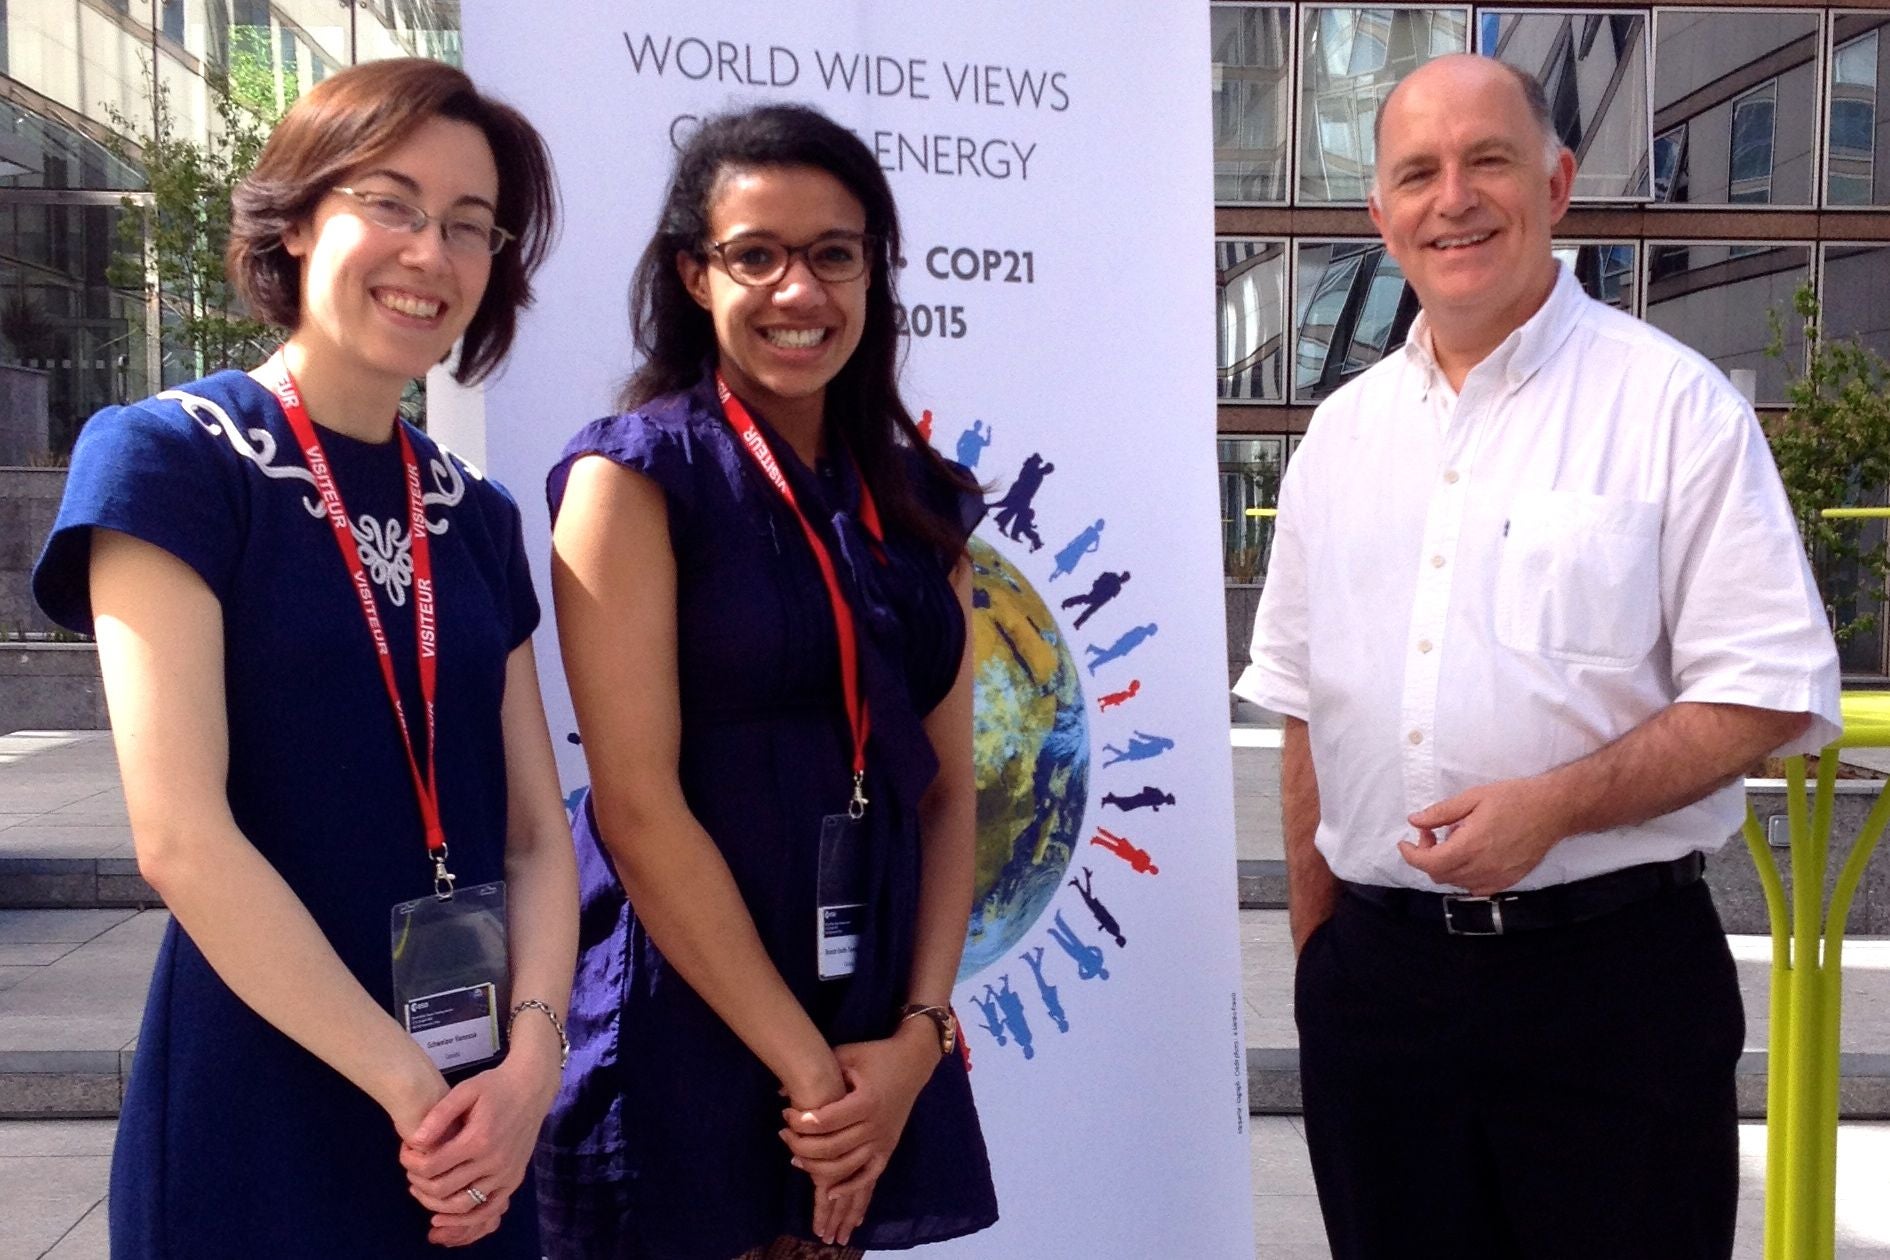 UW's Vanessa Schweizer and Teresa Branch-Smith meet with World Wide Views organizer, Yves Mathieu, at a training session in Paris